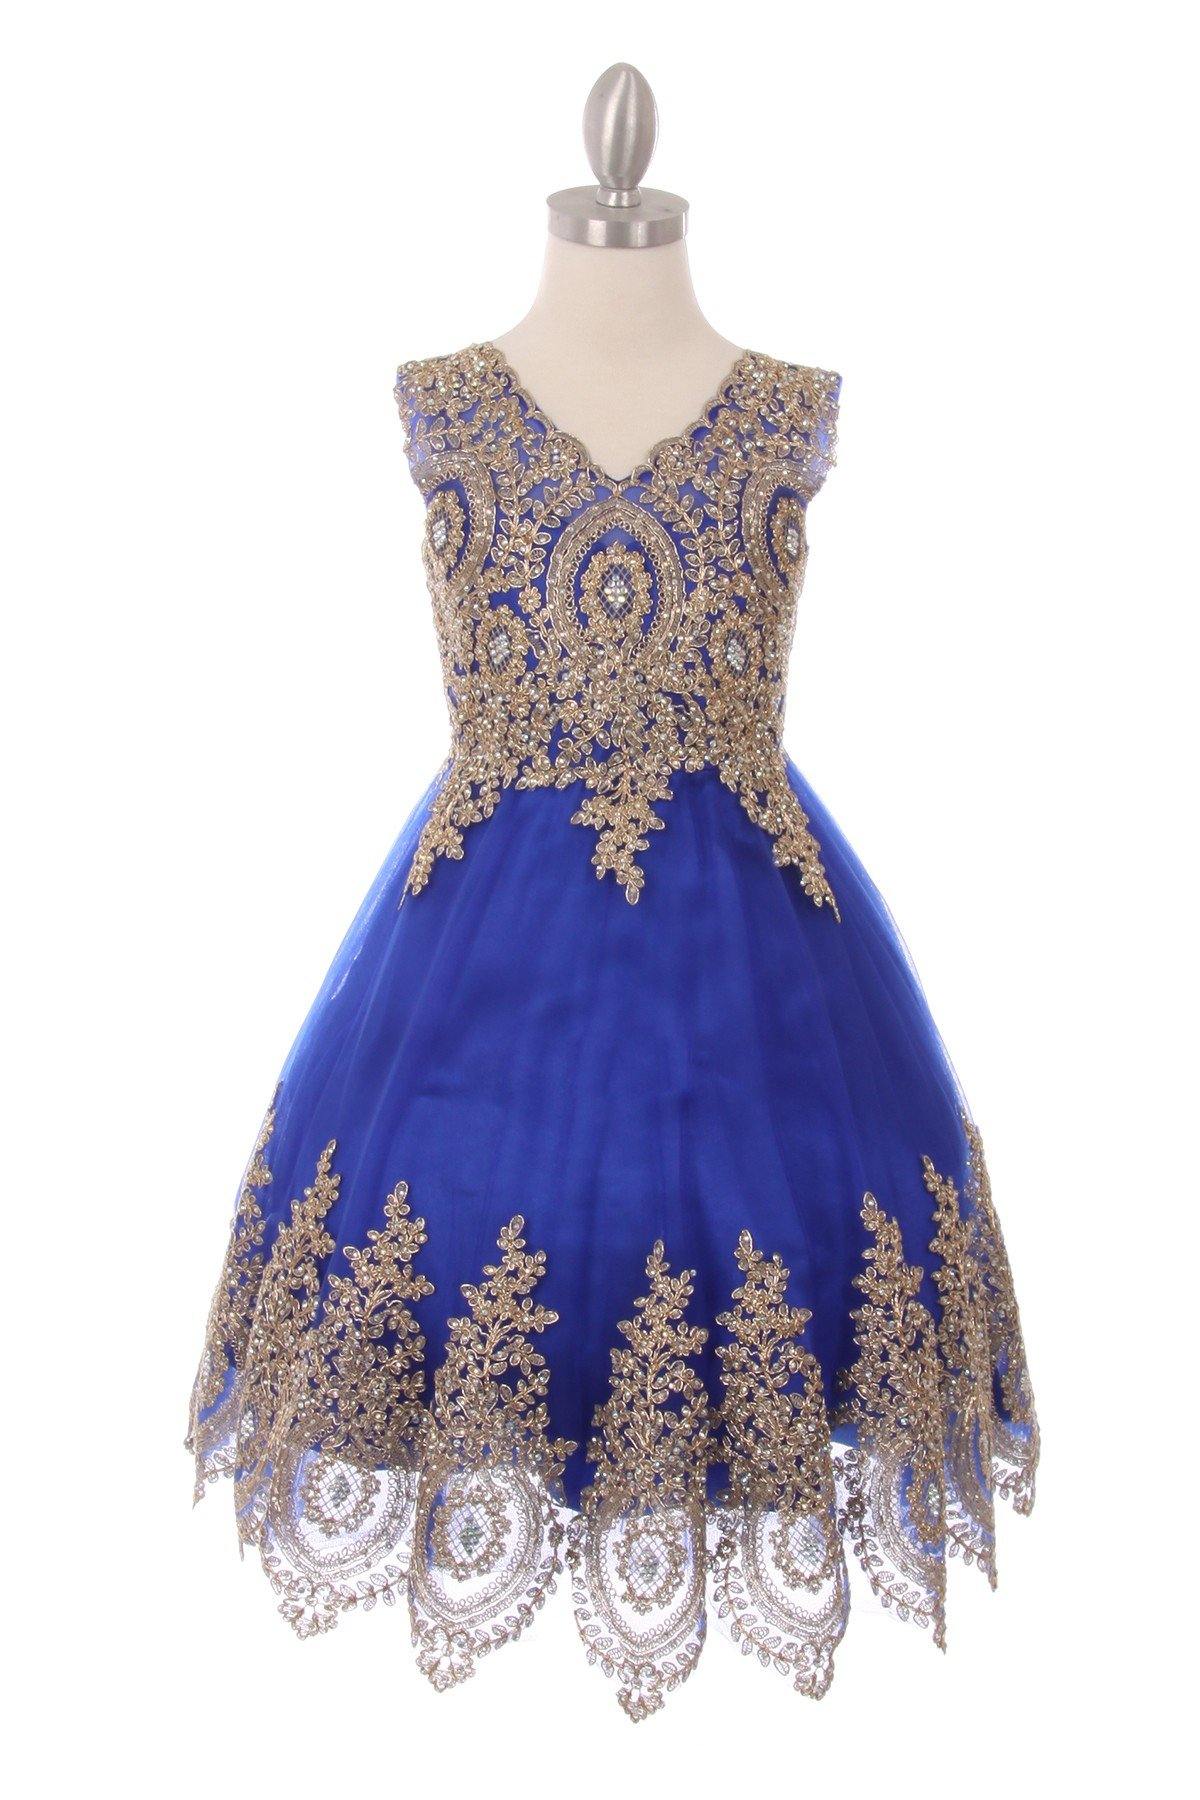 Sleeveless Gold Embellished Short Party Flower Girl Dress - The Dress Outlet Cinderella Couture